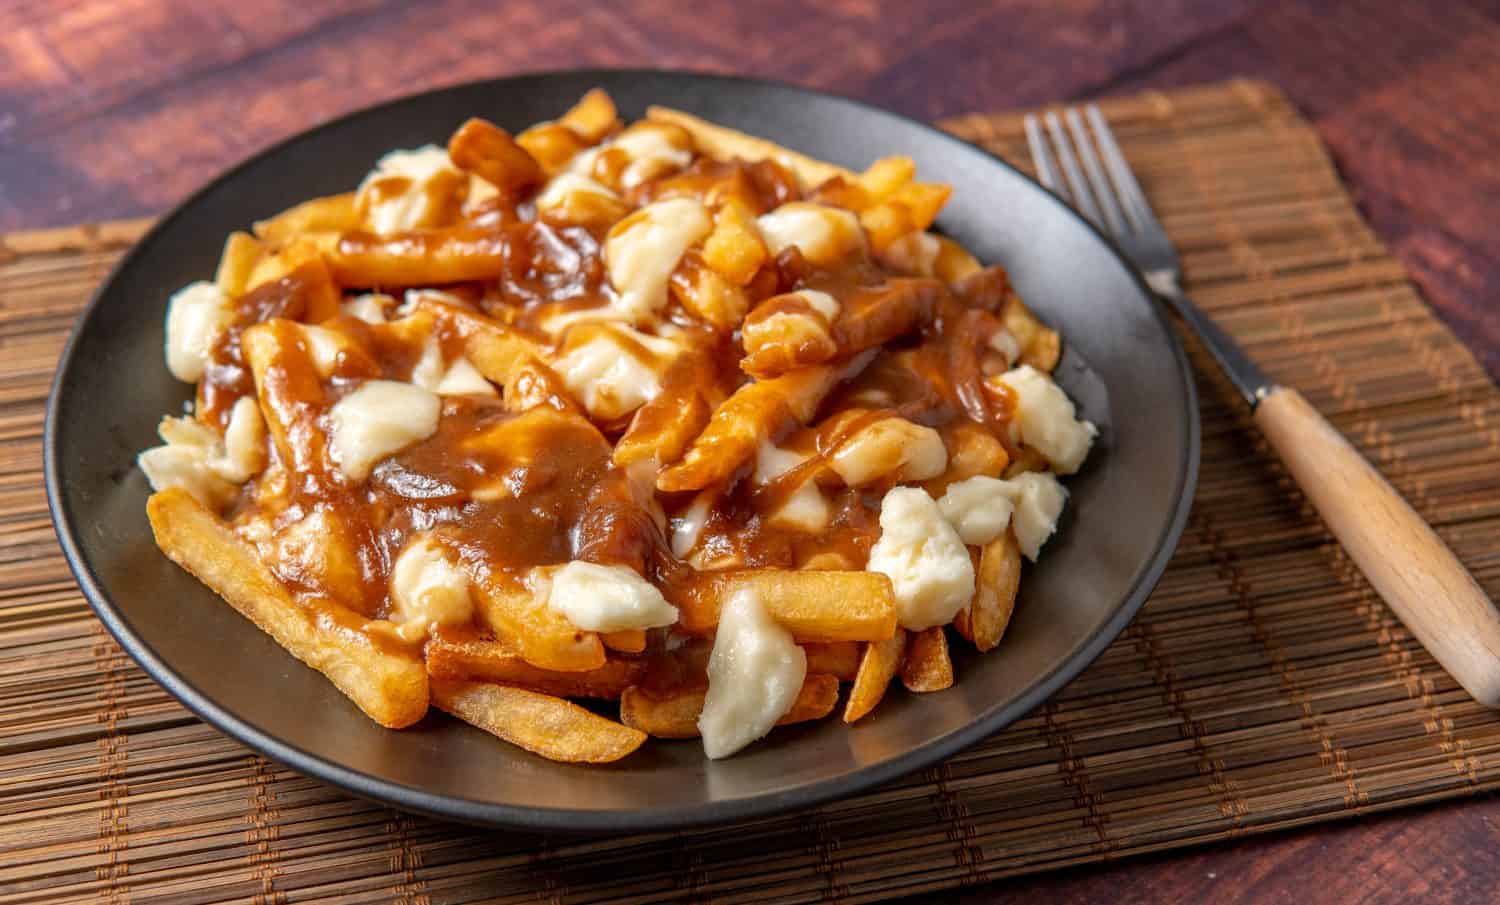 Delicious Poutine with cheese curds french fries on the table. so juicy and yummy